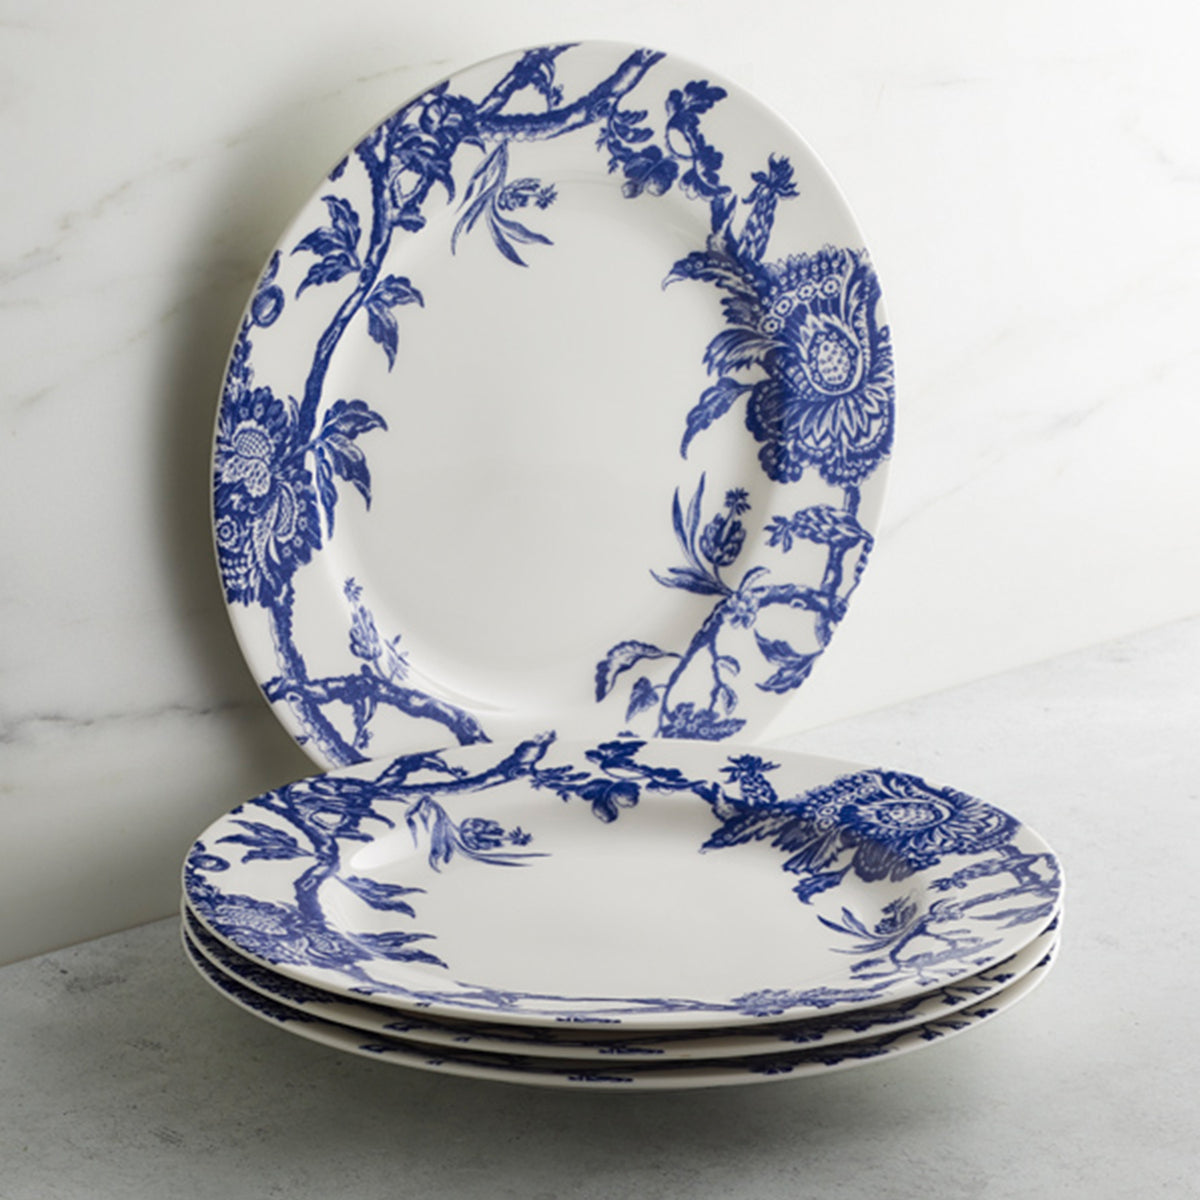 Four white plates with graphic blue floral patterns are stacked on a marble surface, showcasing Arcadia Rimmed Dinner Plate by Caskata Artisanal Home inspired by the Williamsburg Foundation.